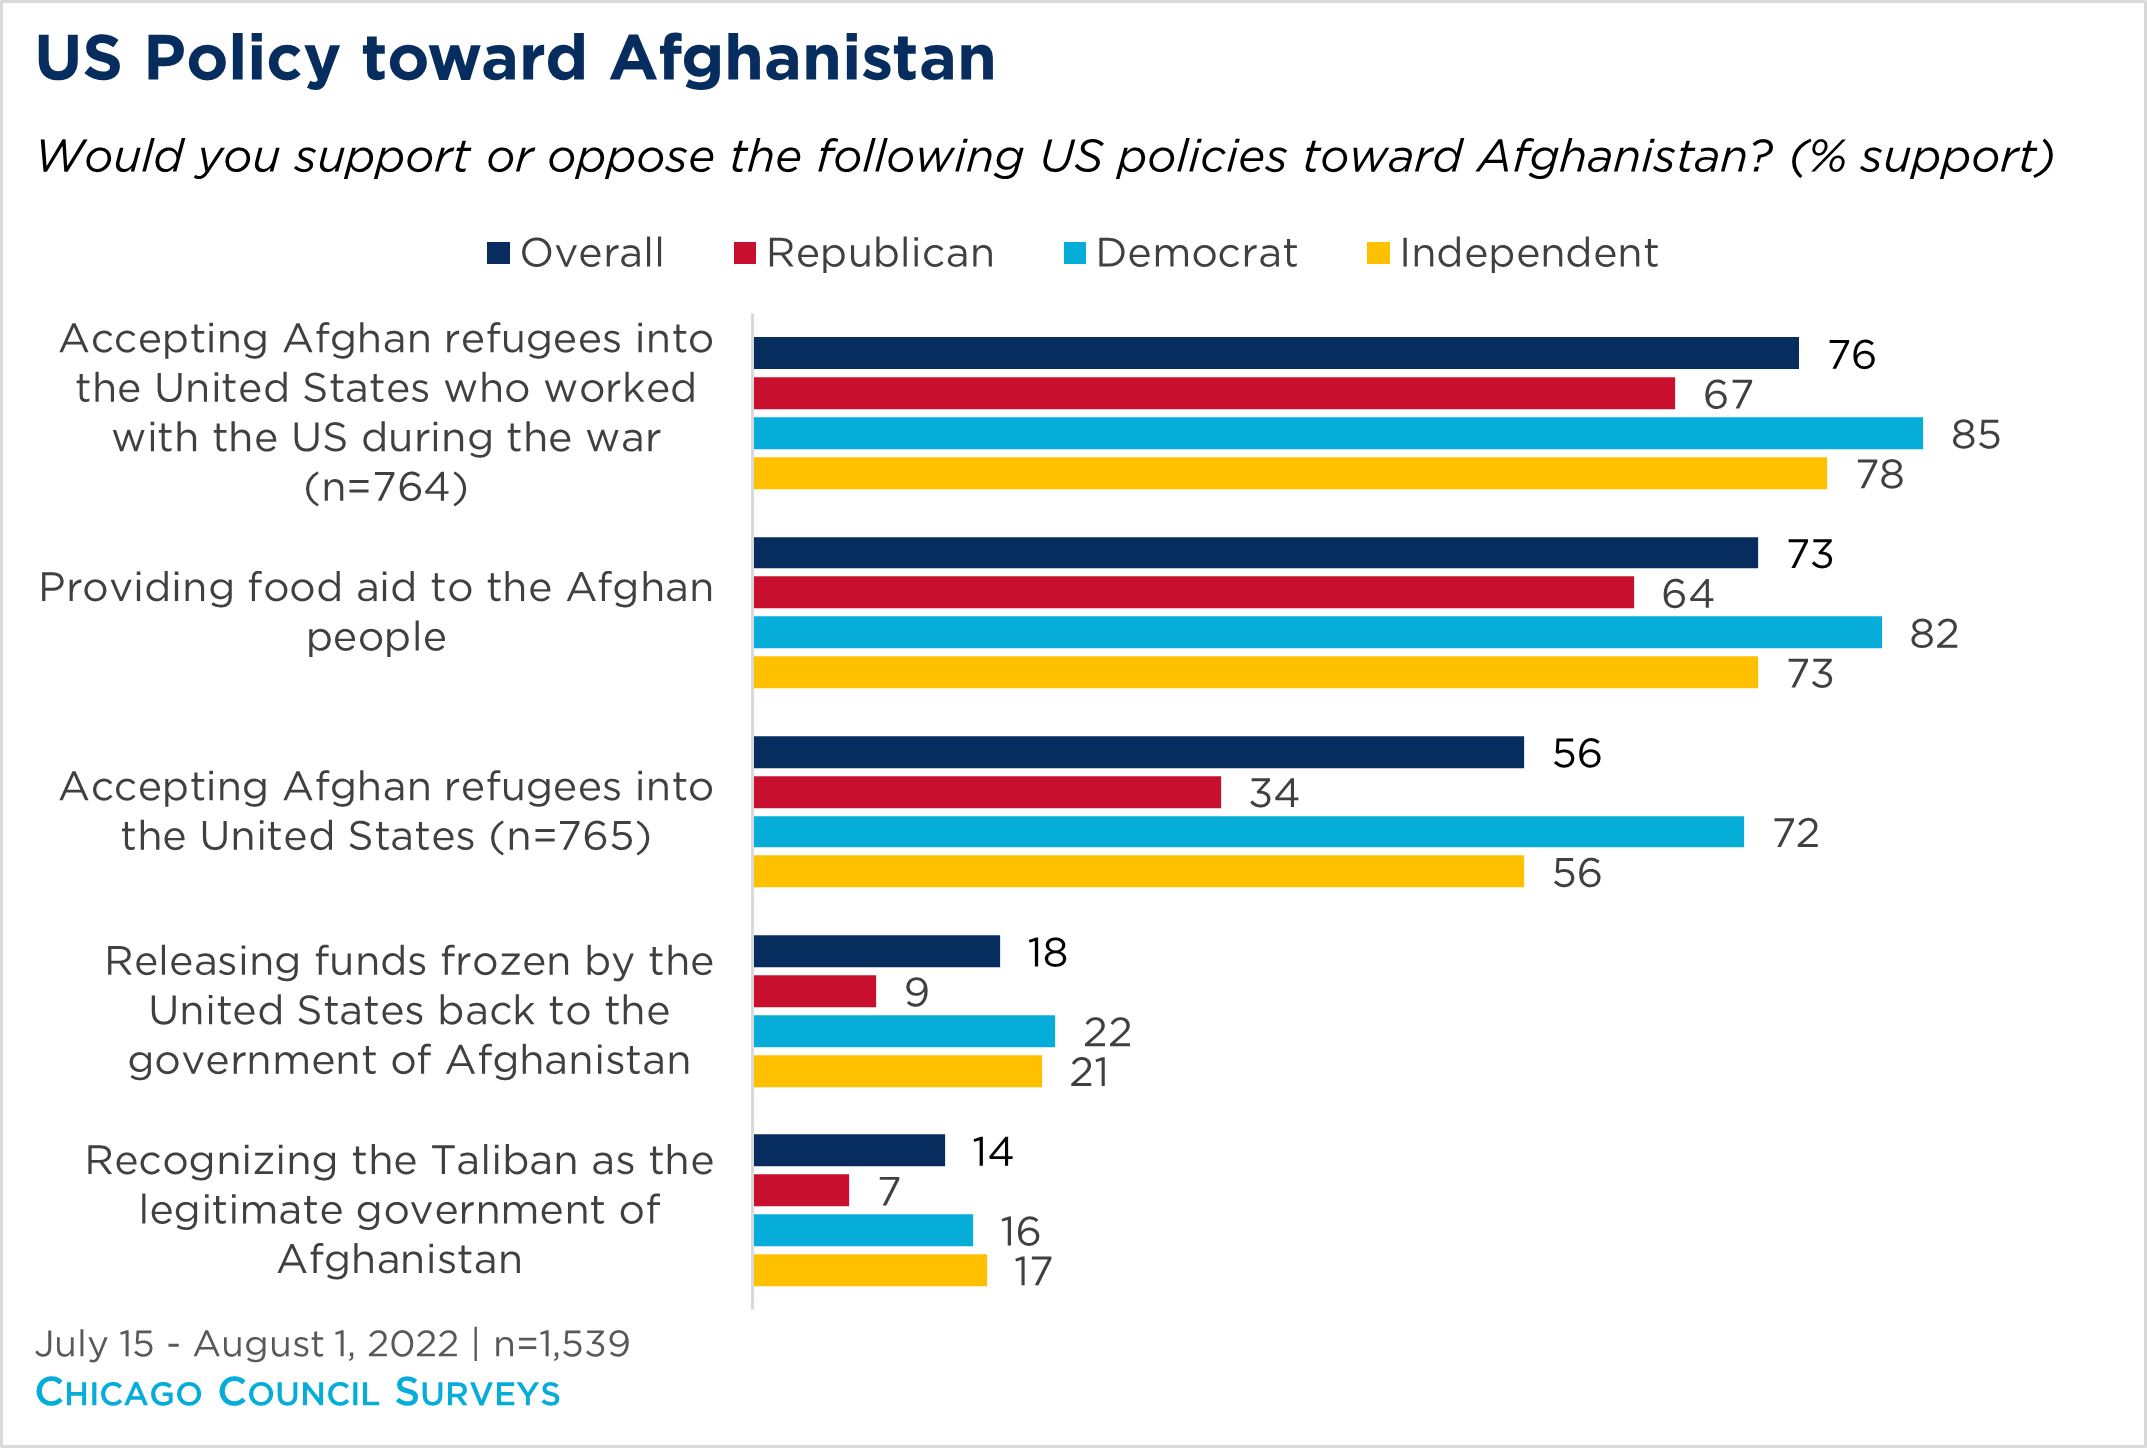 "a bar chart showing support for various US policies toward Afghanistan by political party"